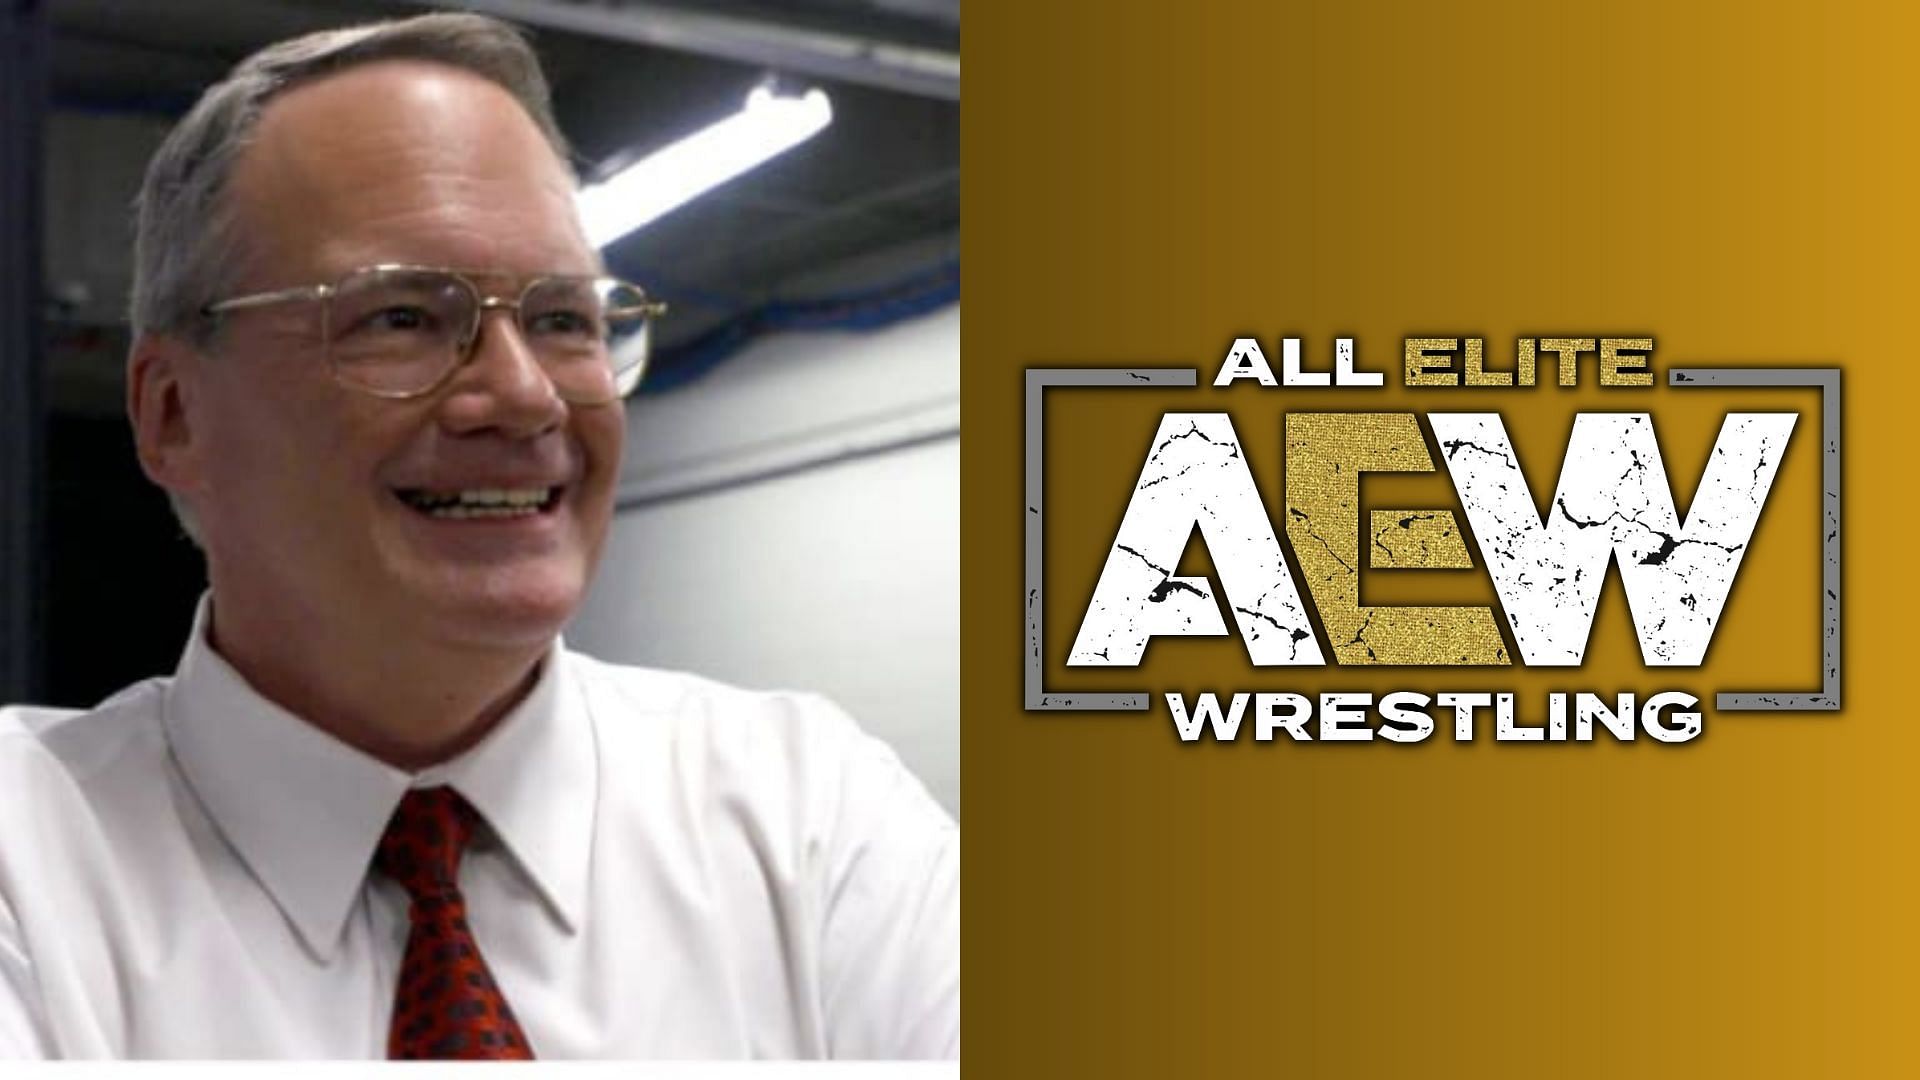 Jim Cornette had some harsh things to say this week